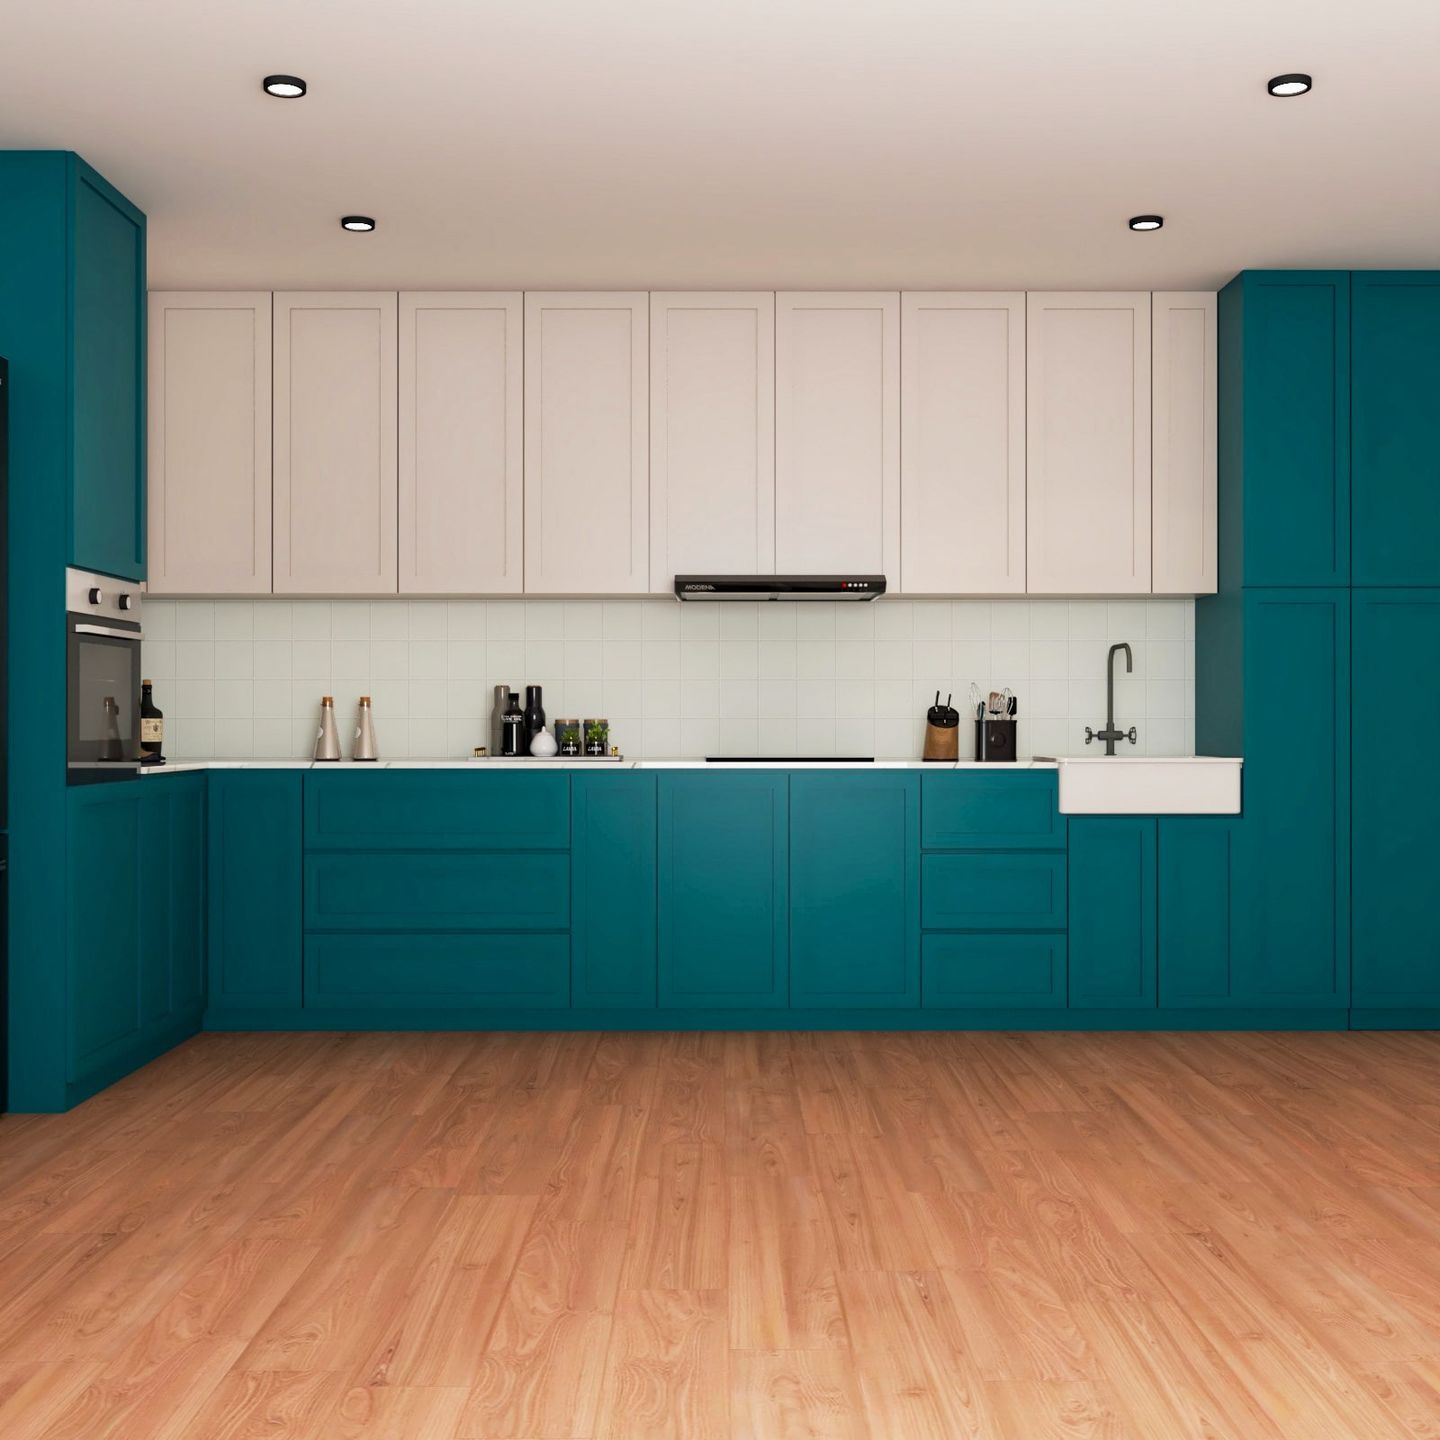 Teal Blue And White L-Shaped Kitchen - Livspace